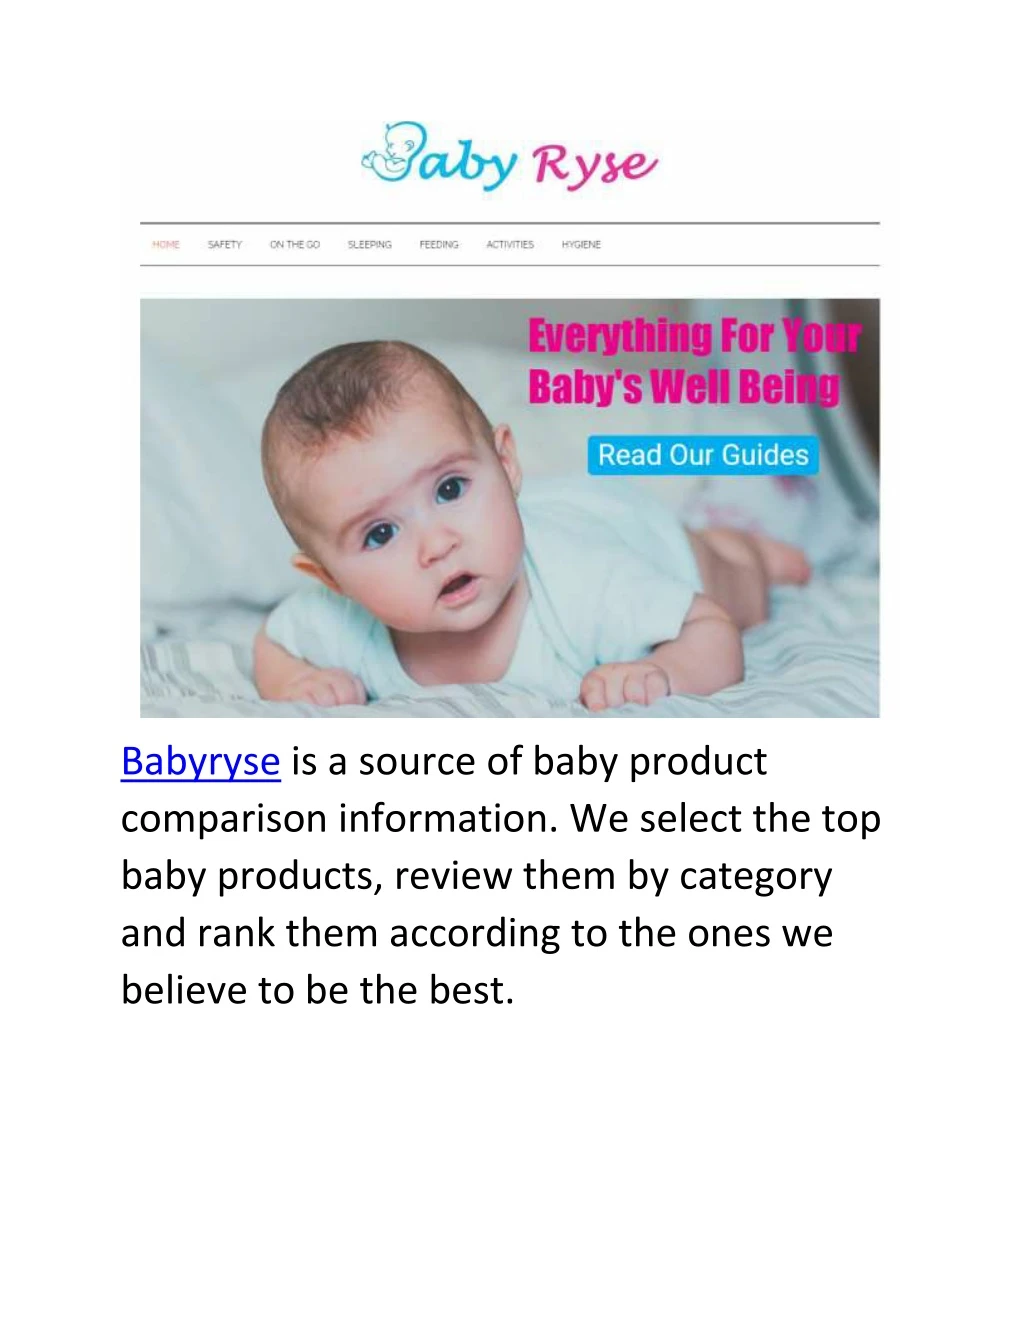 babyryse is a source of baby product comparison